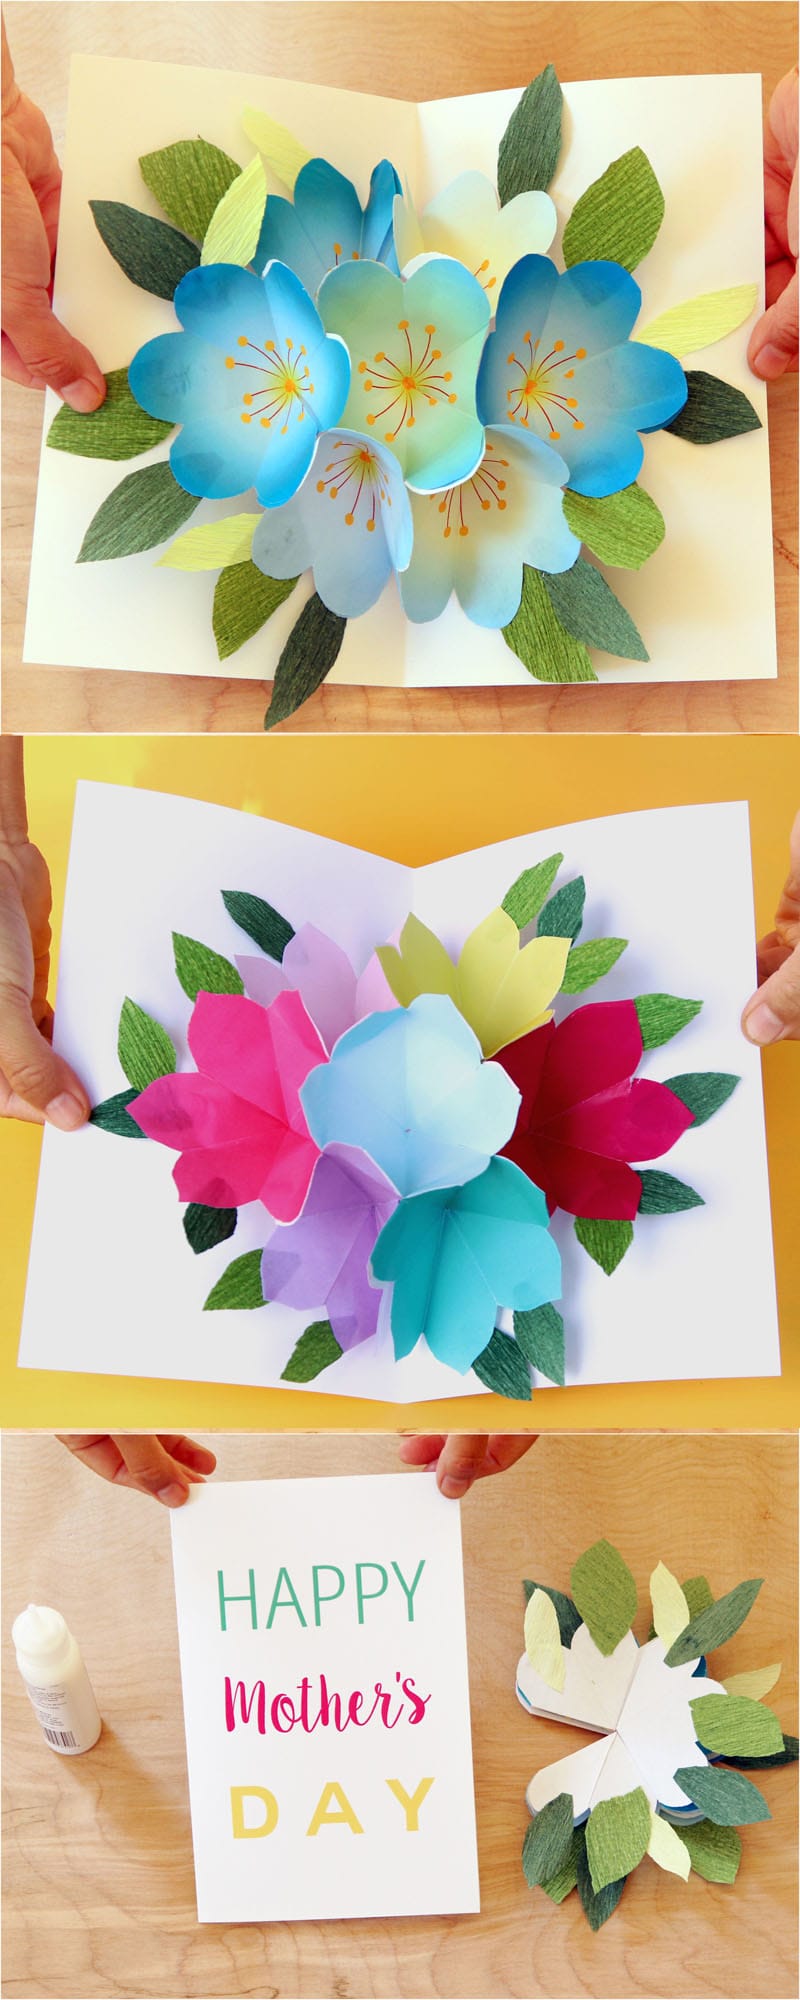 happy-mother-s-day-greeting-card-handmade-3d-cut-out-pop-up-cards